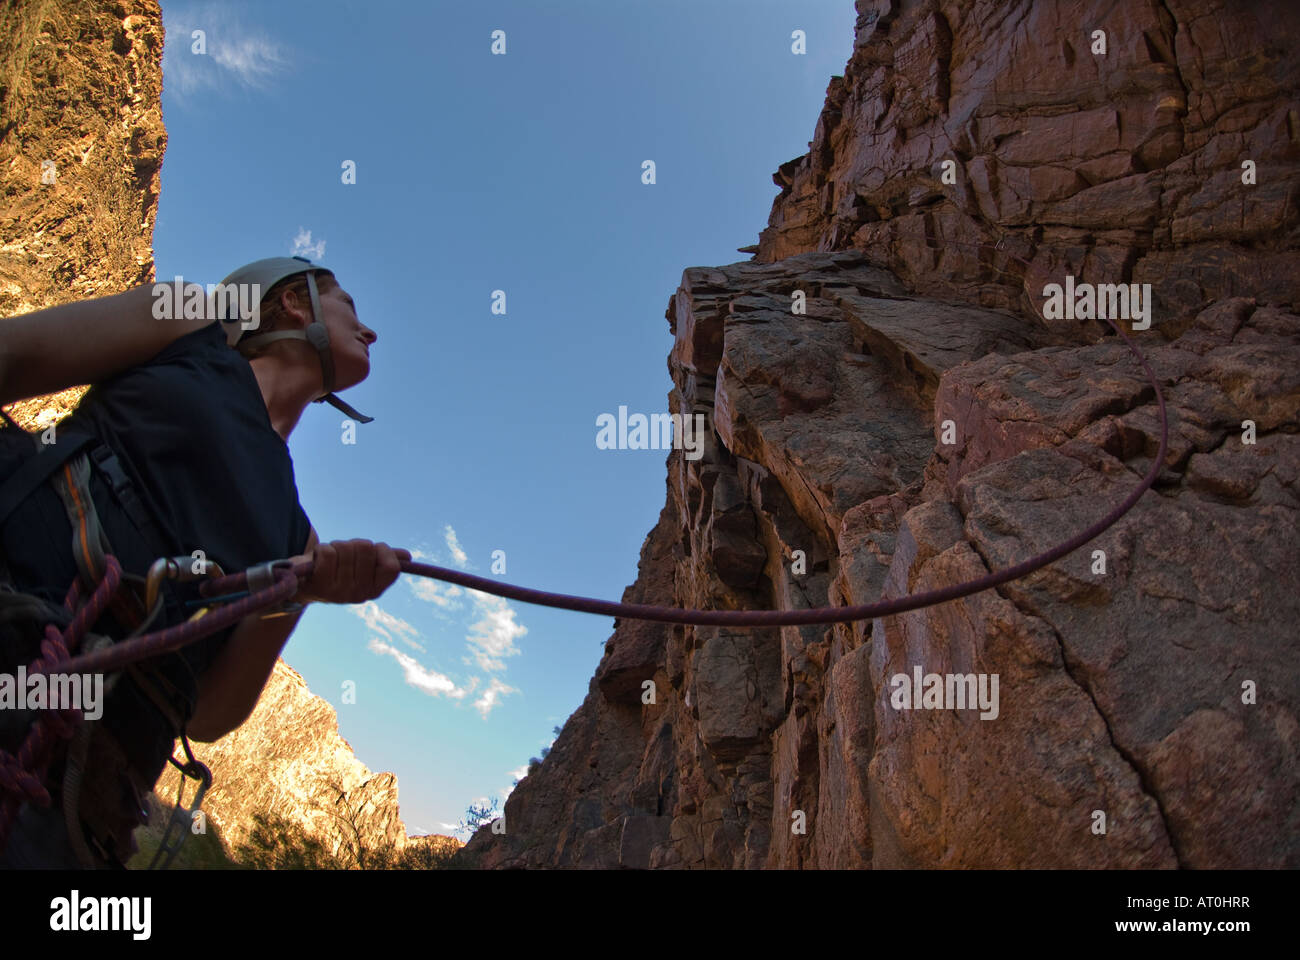 Climbing at Lower Creamation Camp during a raft trip on the Colorado River in the Grand Canyon National Park Arizona Stock Photo